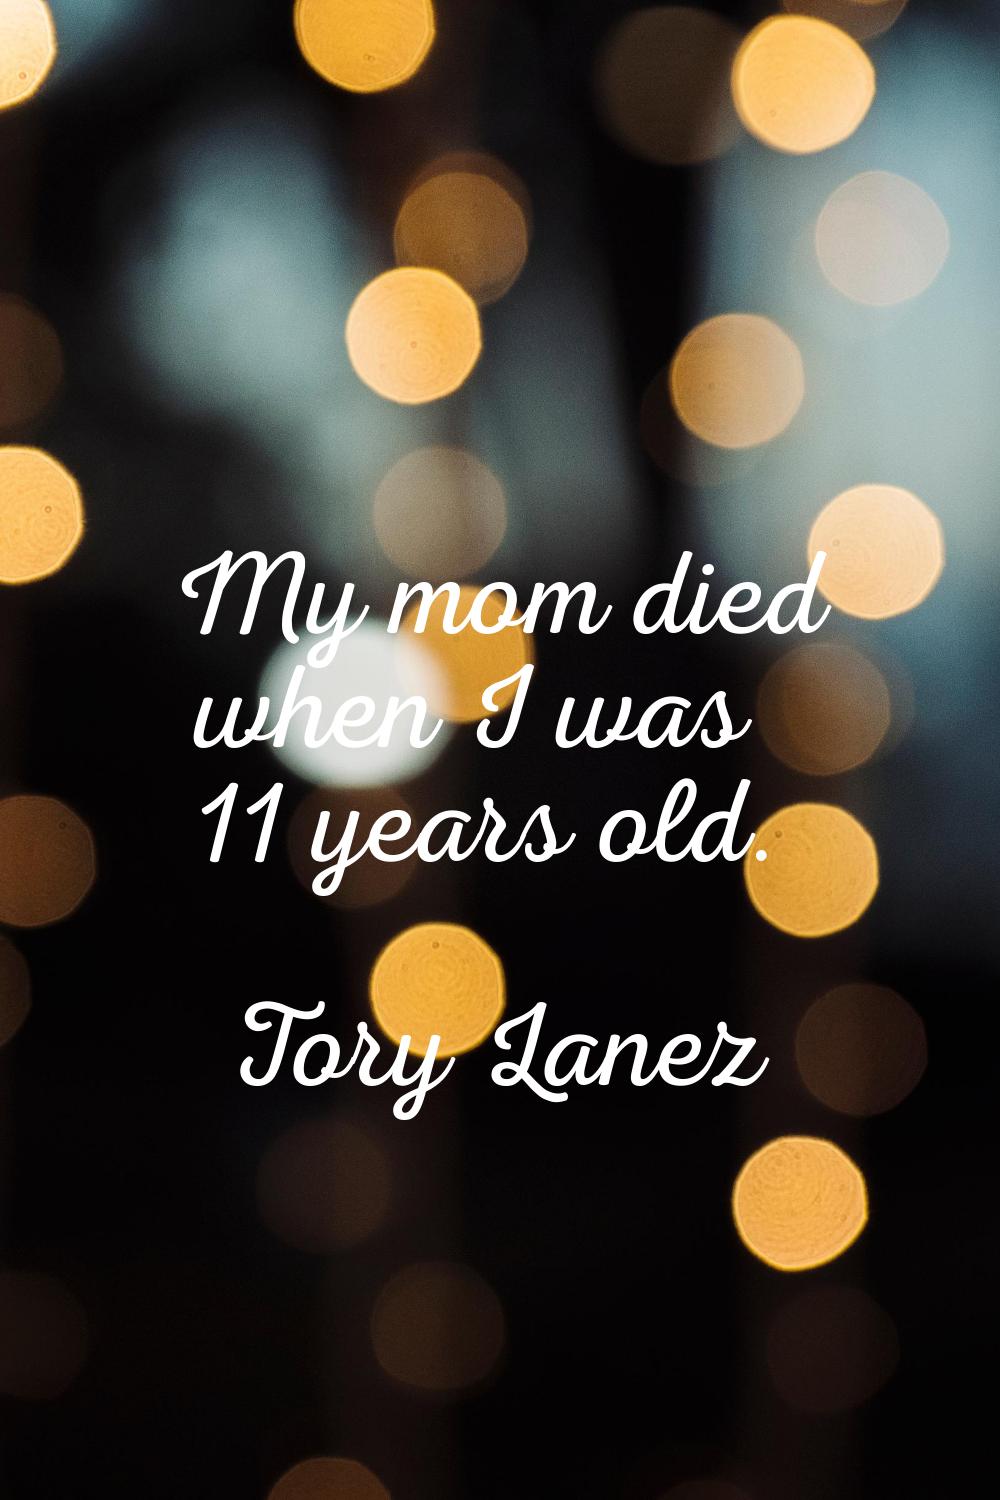 My mom died when I was 11 years old.